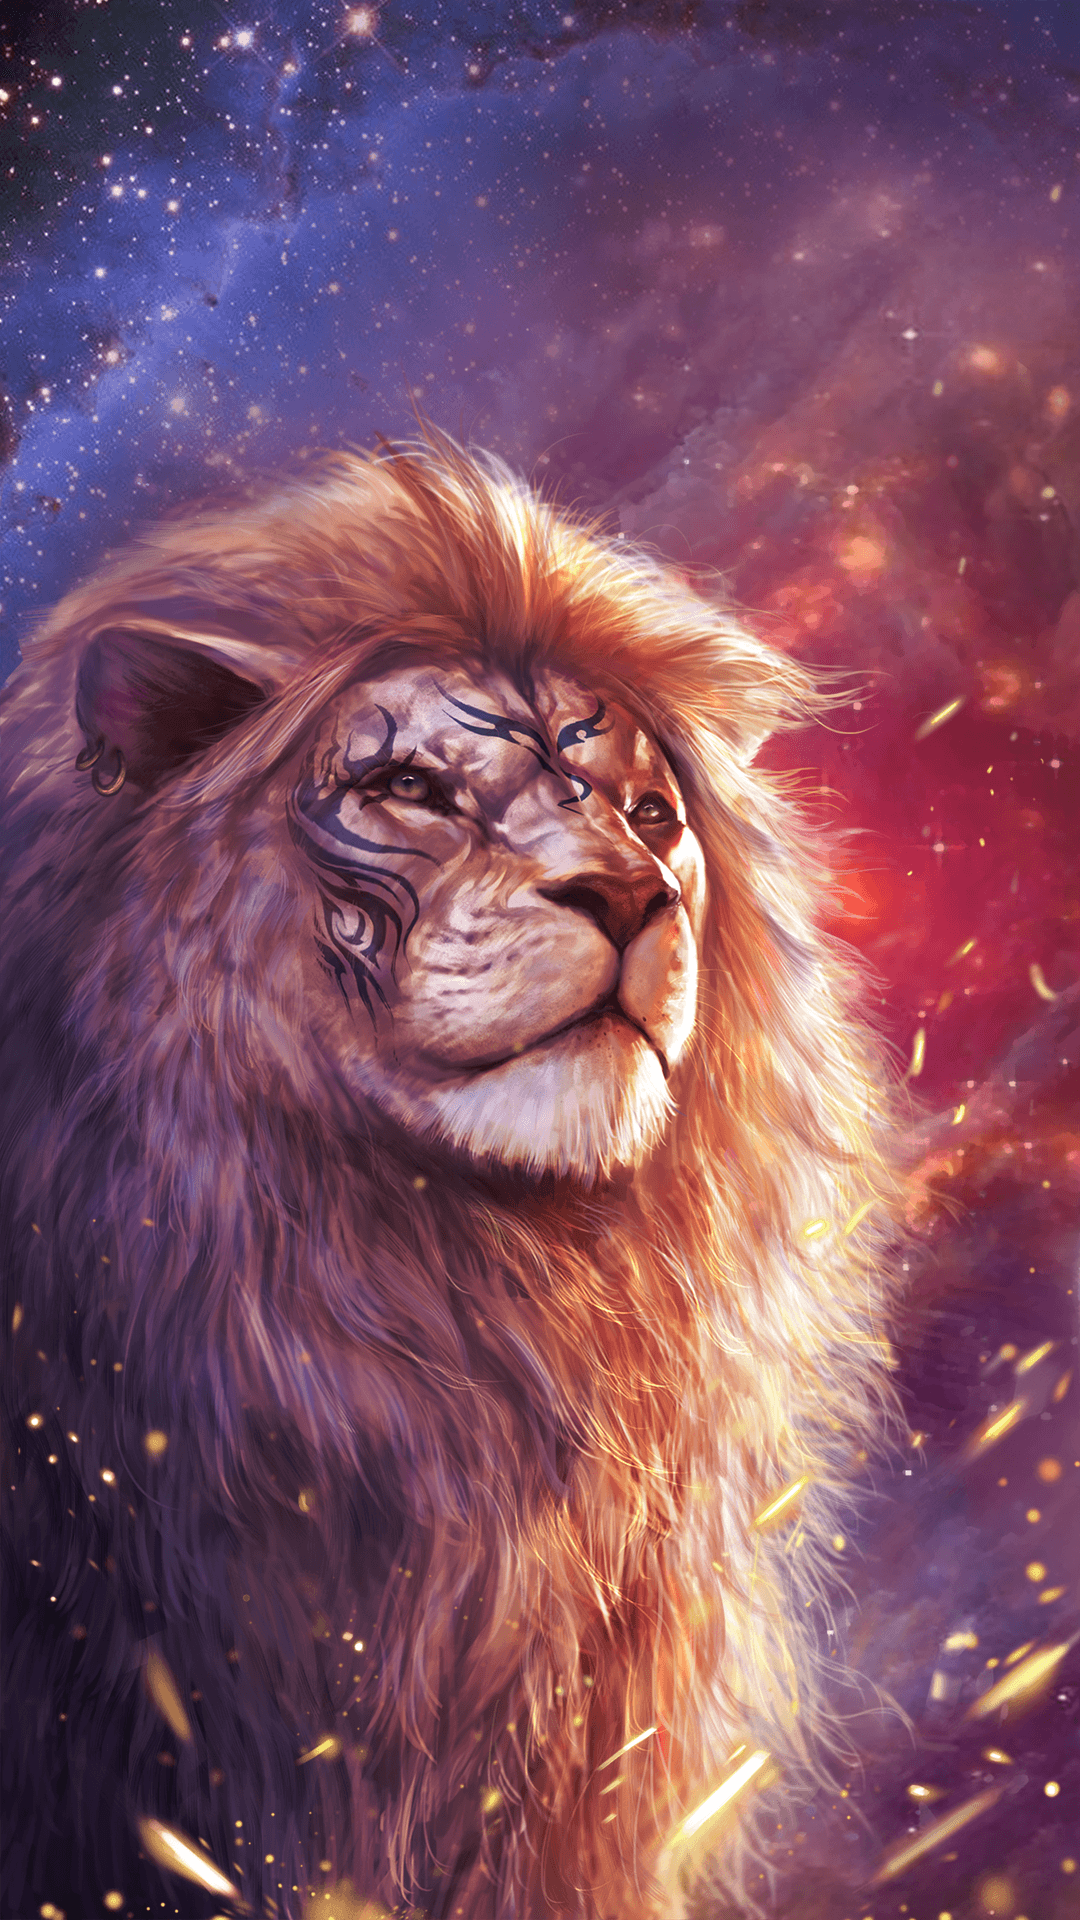 Cool lion wallpaper with totem tattoo!. Android live wallpaper